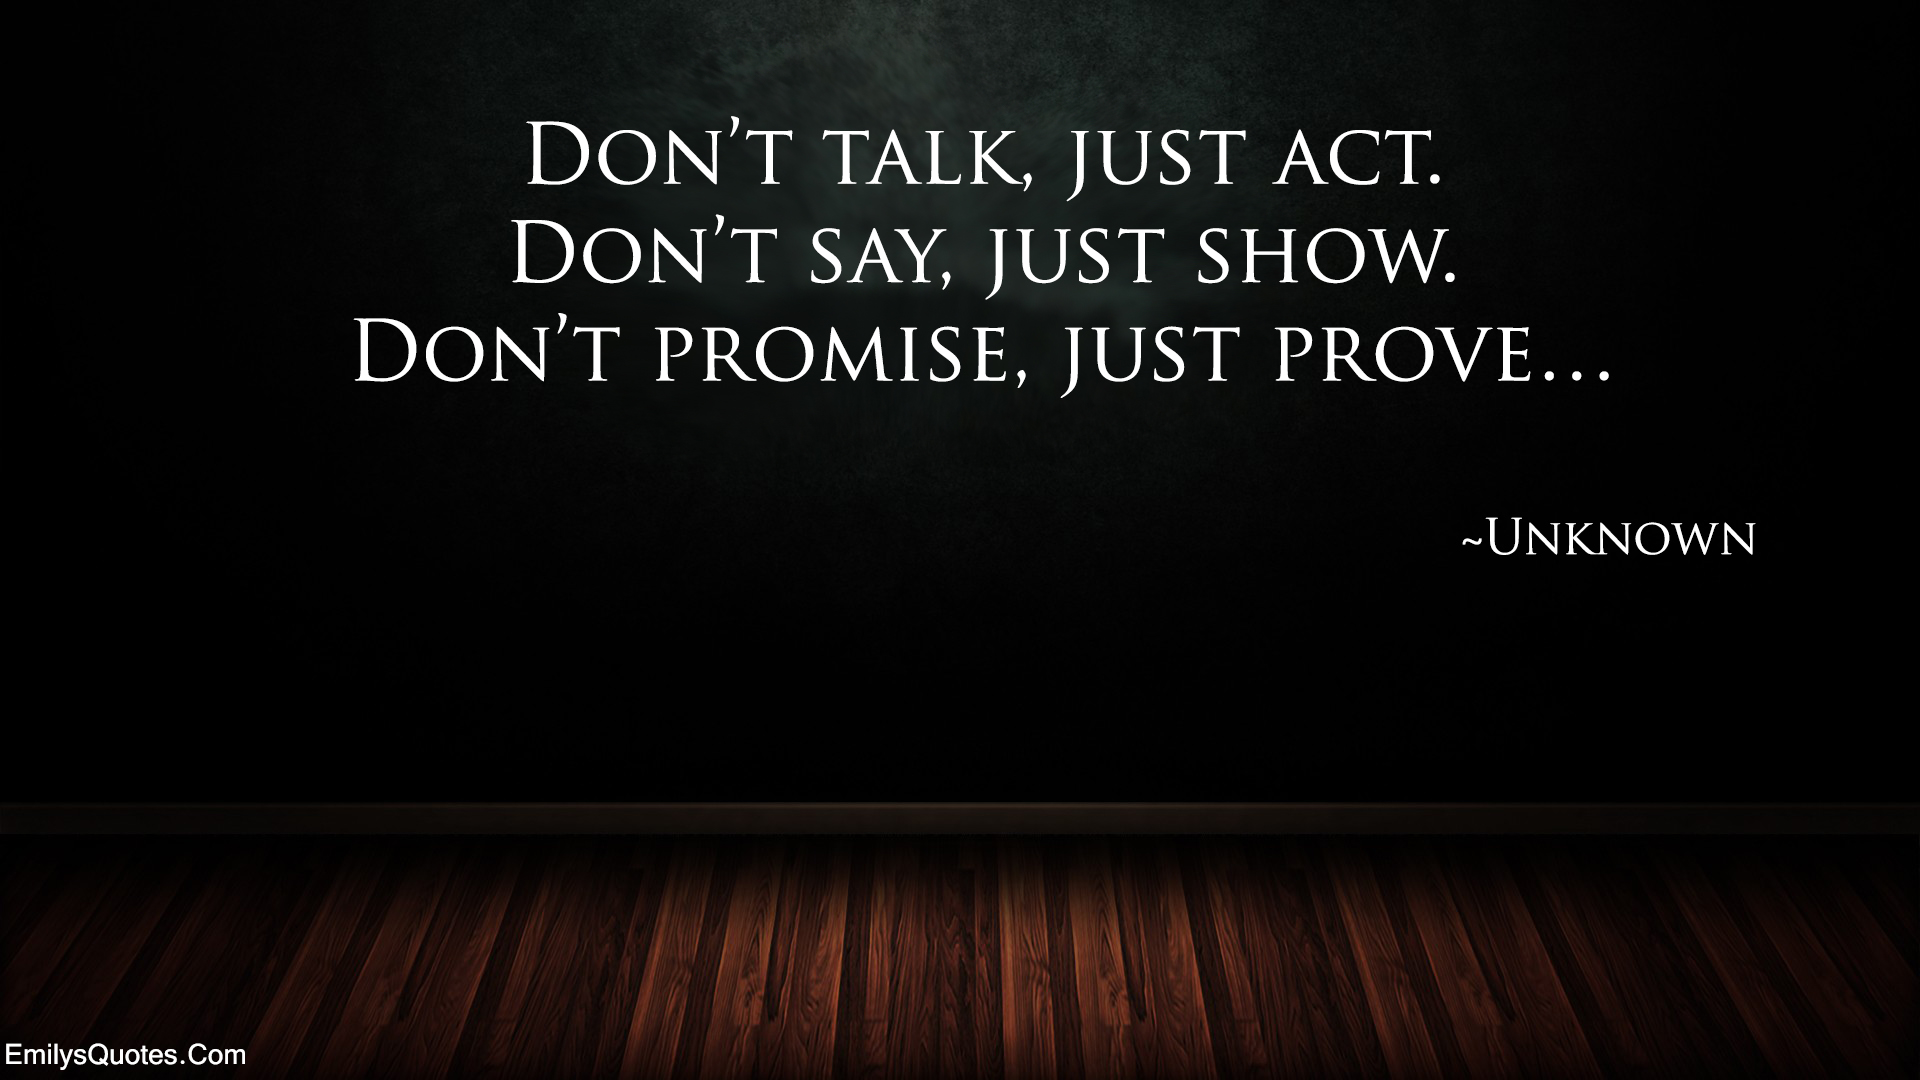 Don’t talk, just act. Don’t say, just show. Don’t promise, just prove…